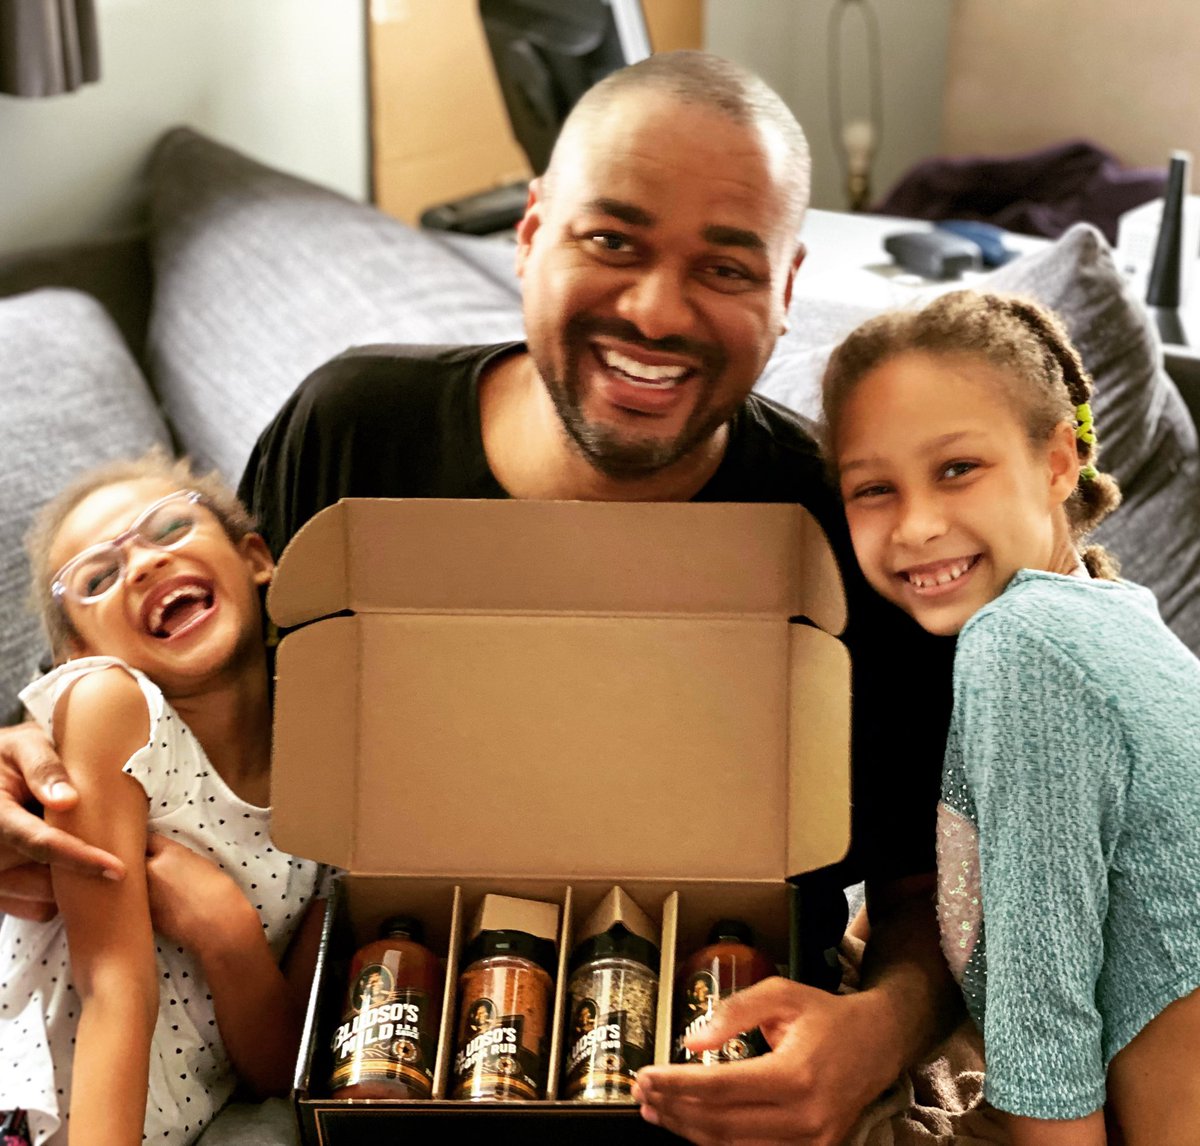 Bbq rubs and sauces! Just what Daddy wanted. 🤤 Happy Father’s Day to all the dads. @bludsosbbq #fathersday